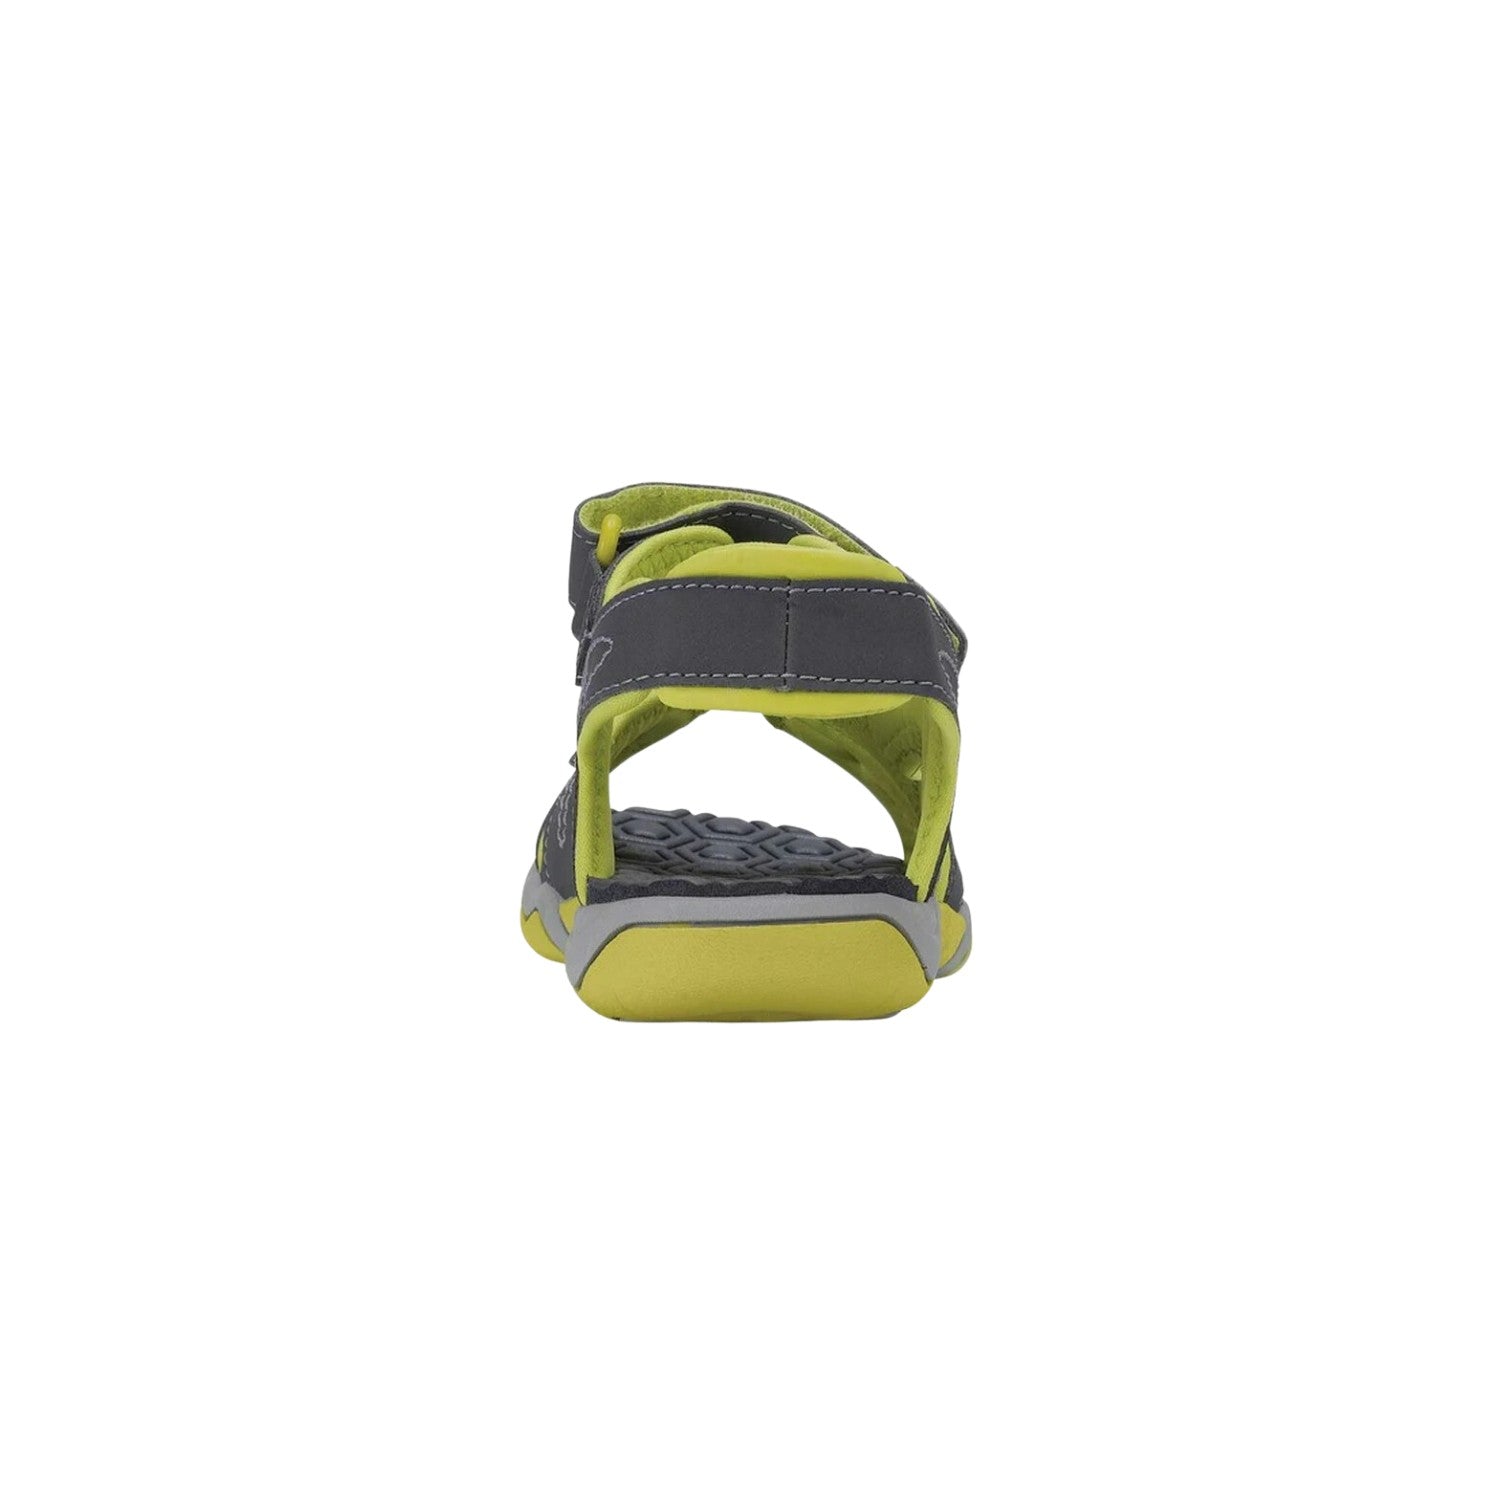 Timberland Adventure Seeker Closed-toe Sandal Toddlers Style : Tb02580a